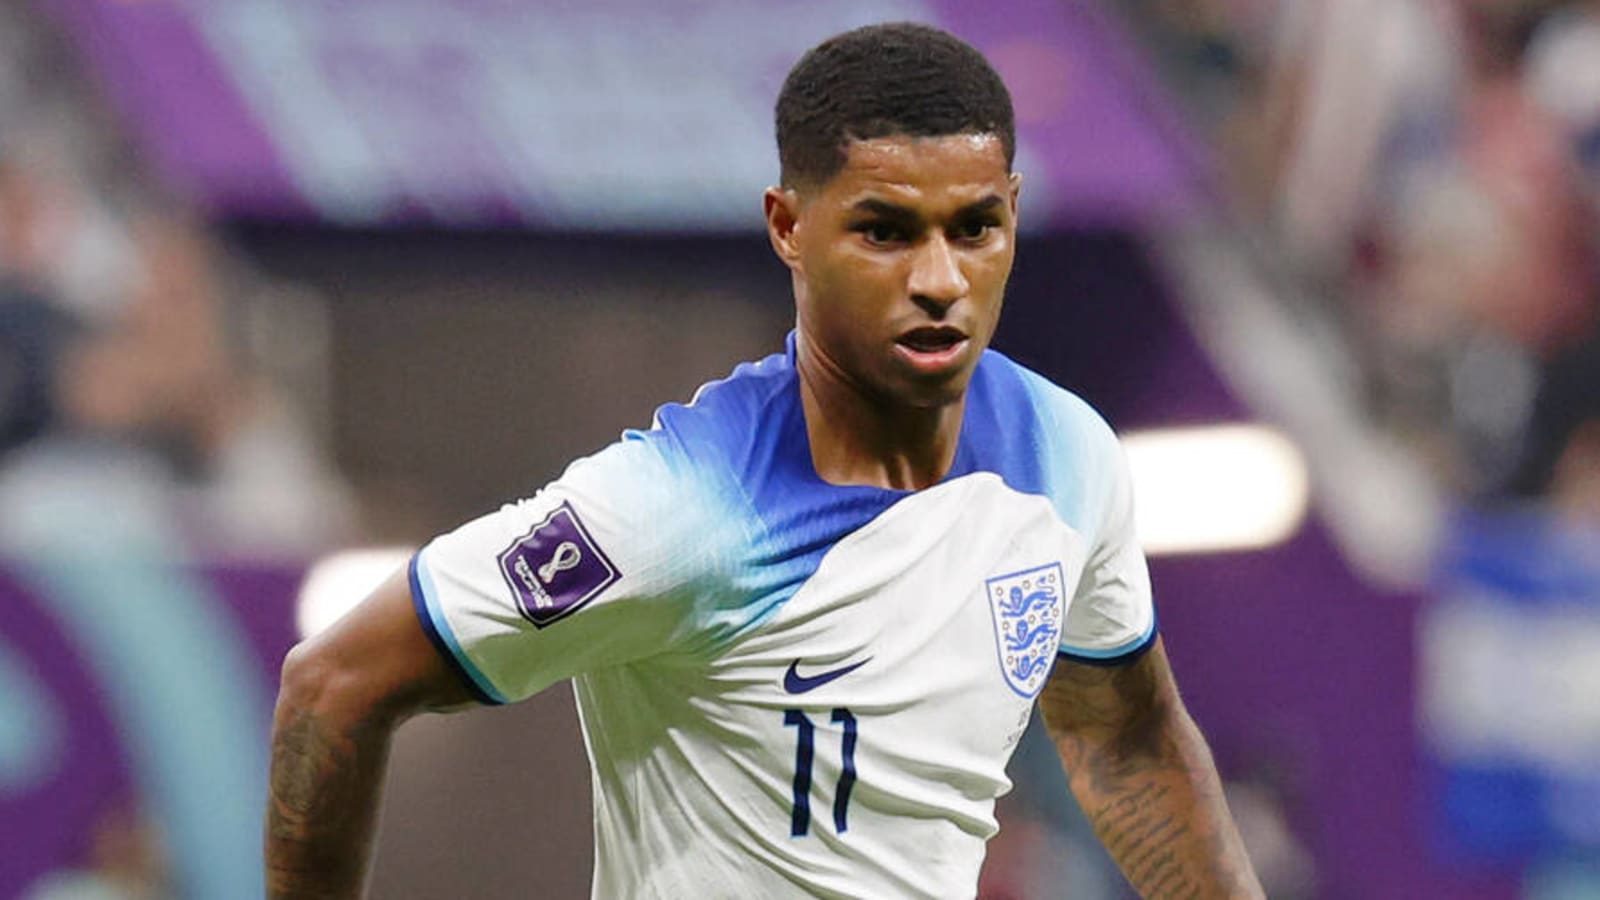 ‘As simple as that’: Rashford breaks silence on England omission as Southgate details reasoning behind decision